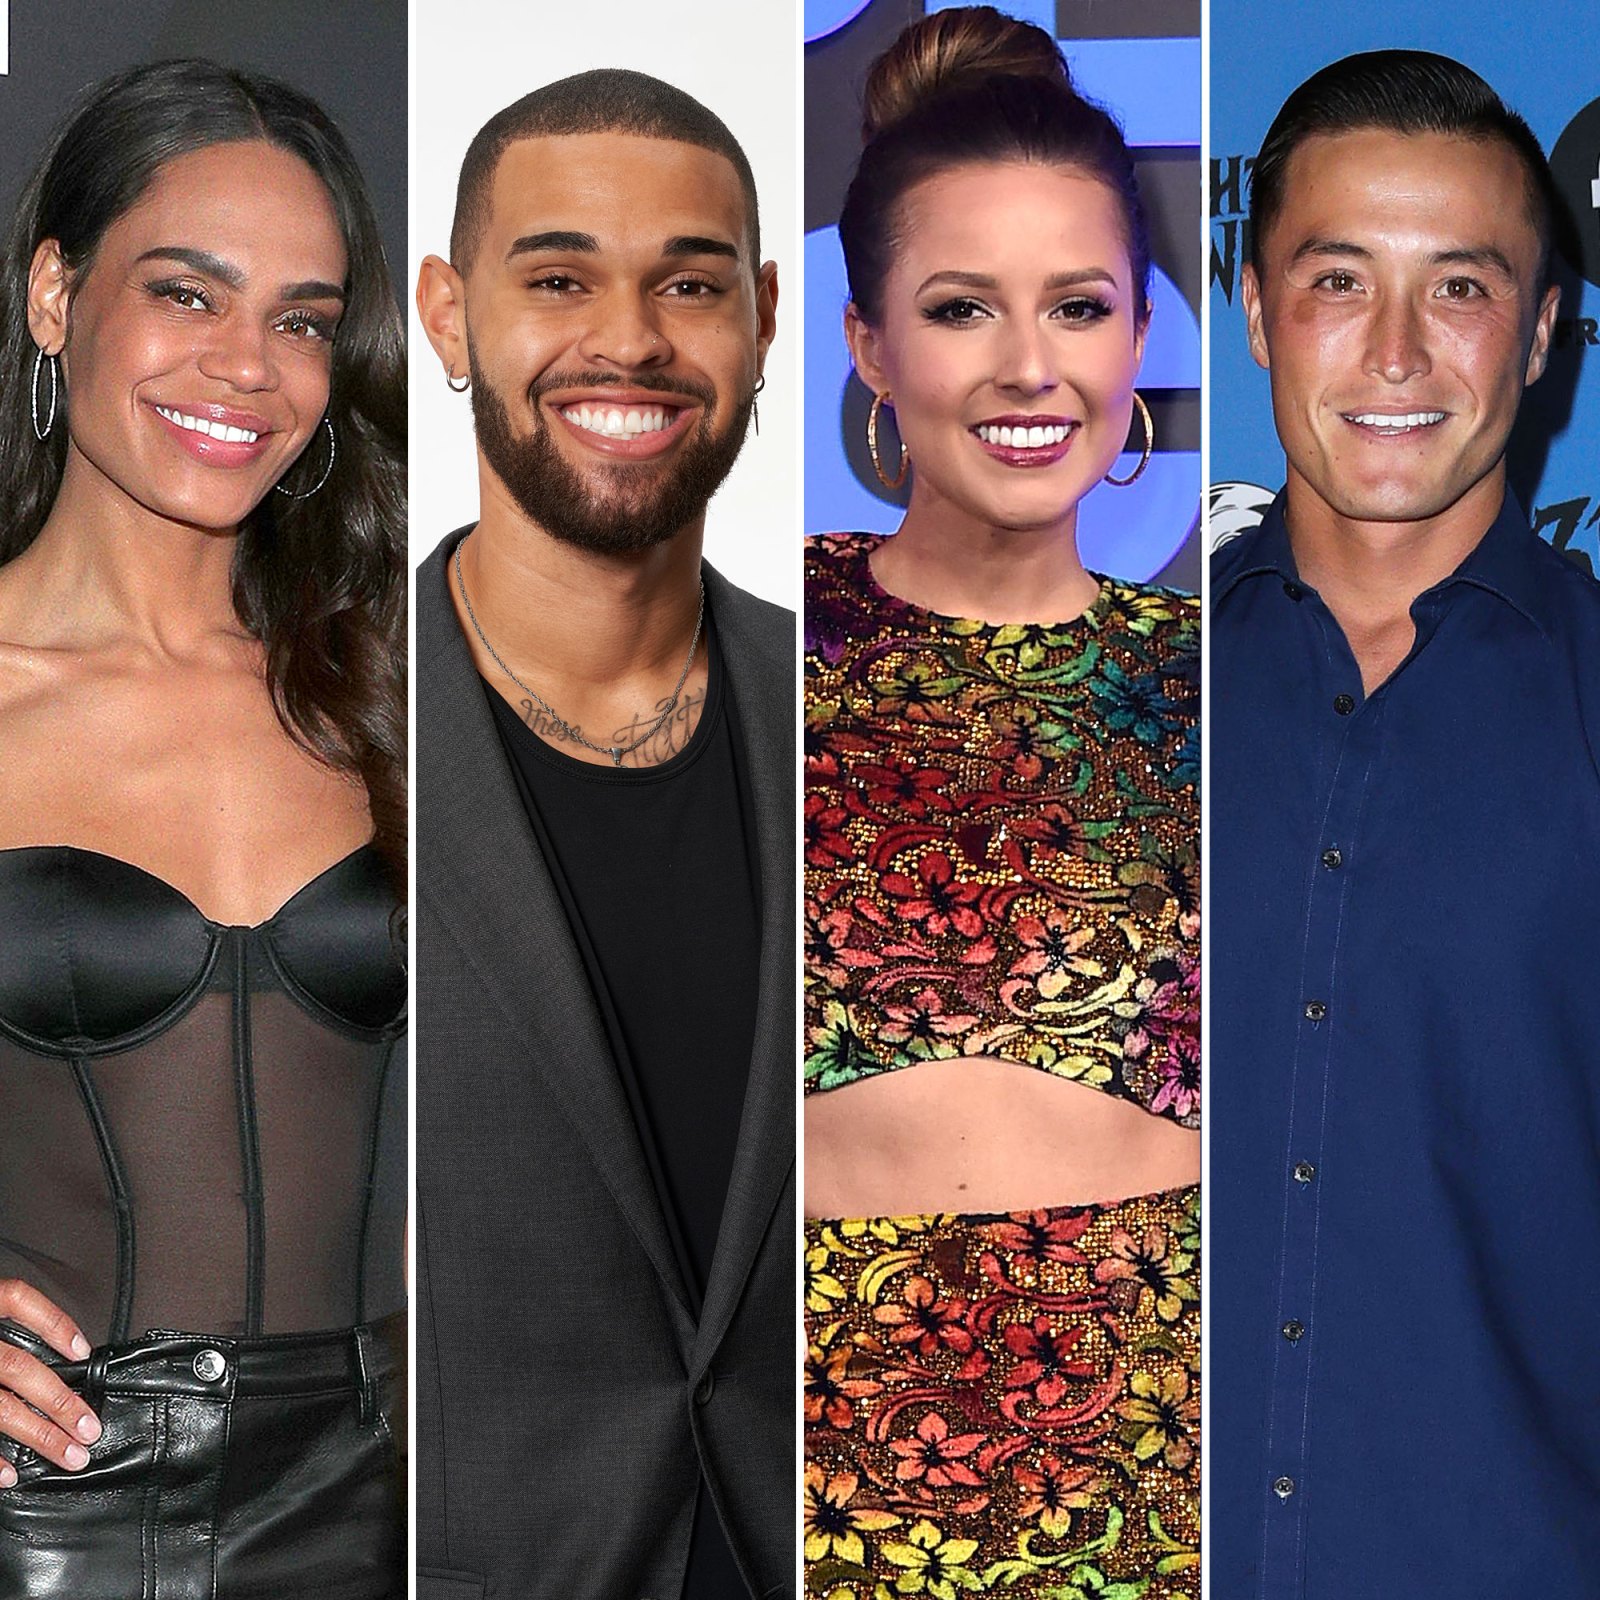 Bachelor Nation Couples Who Have Split in 2022